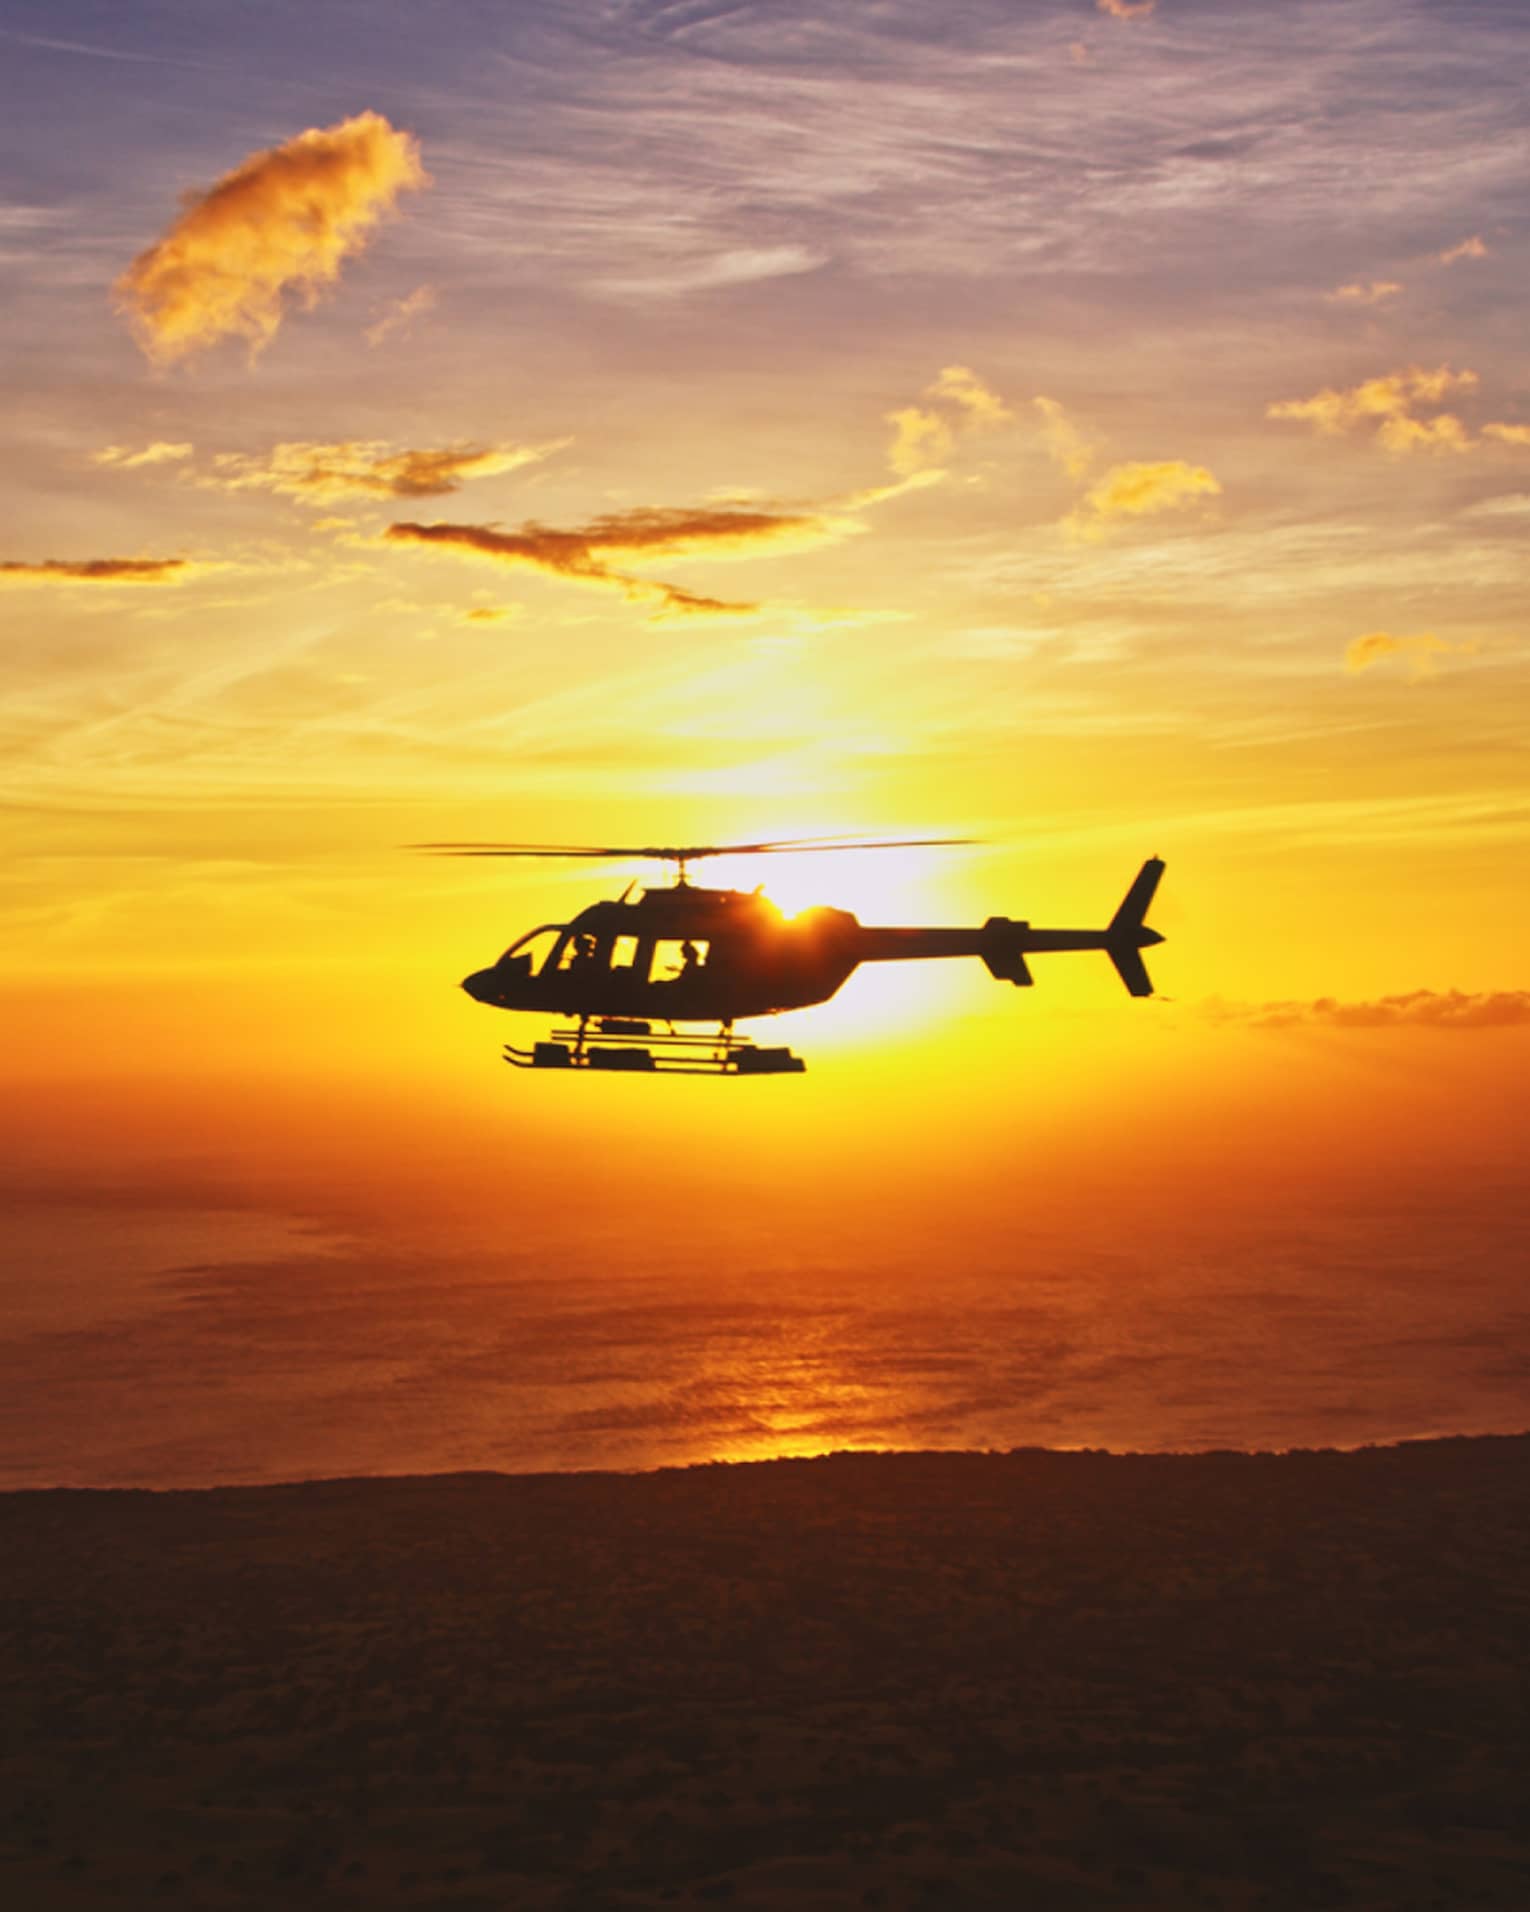 Silhouette of helicopter against orange sunset